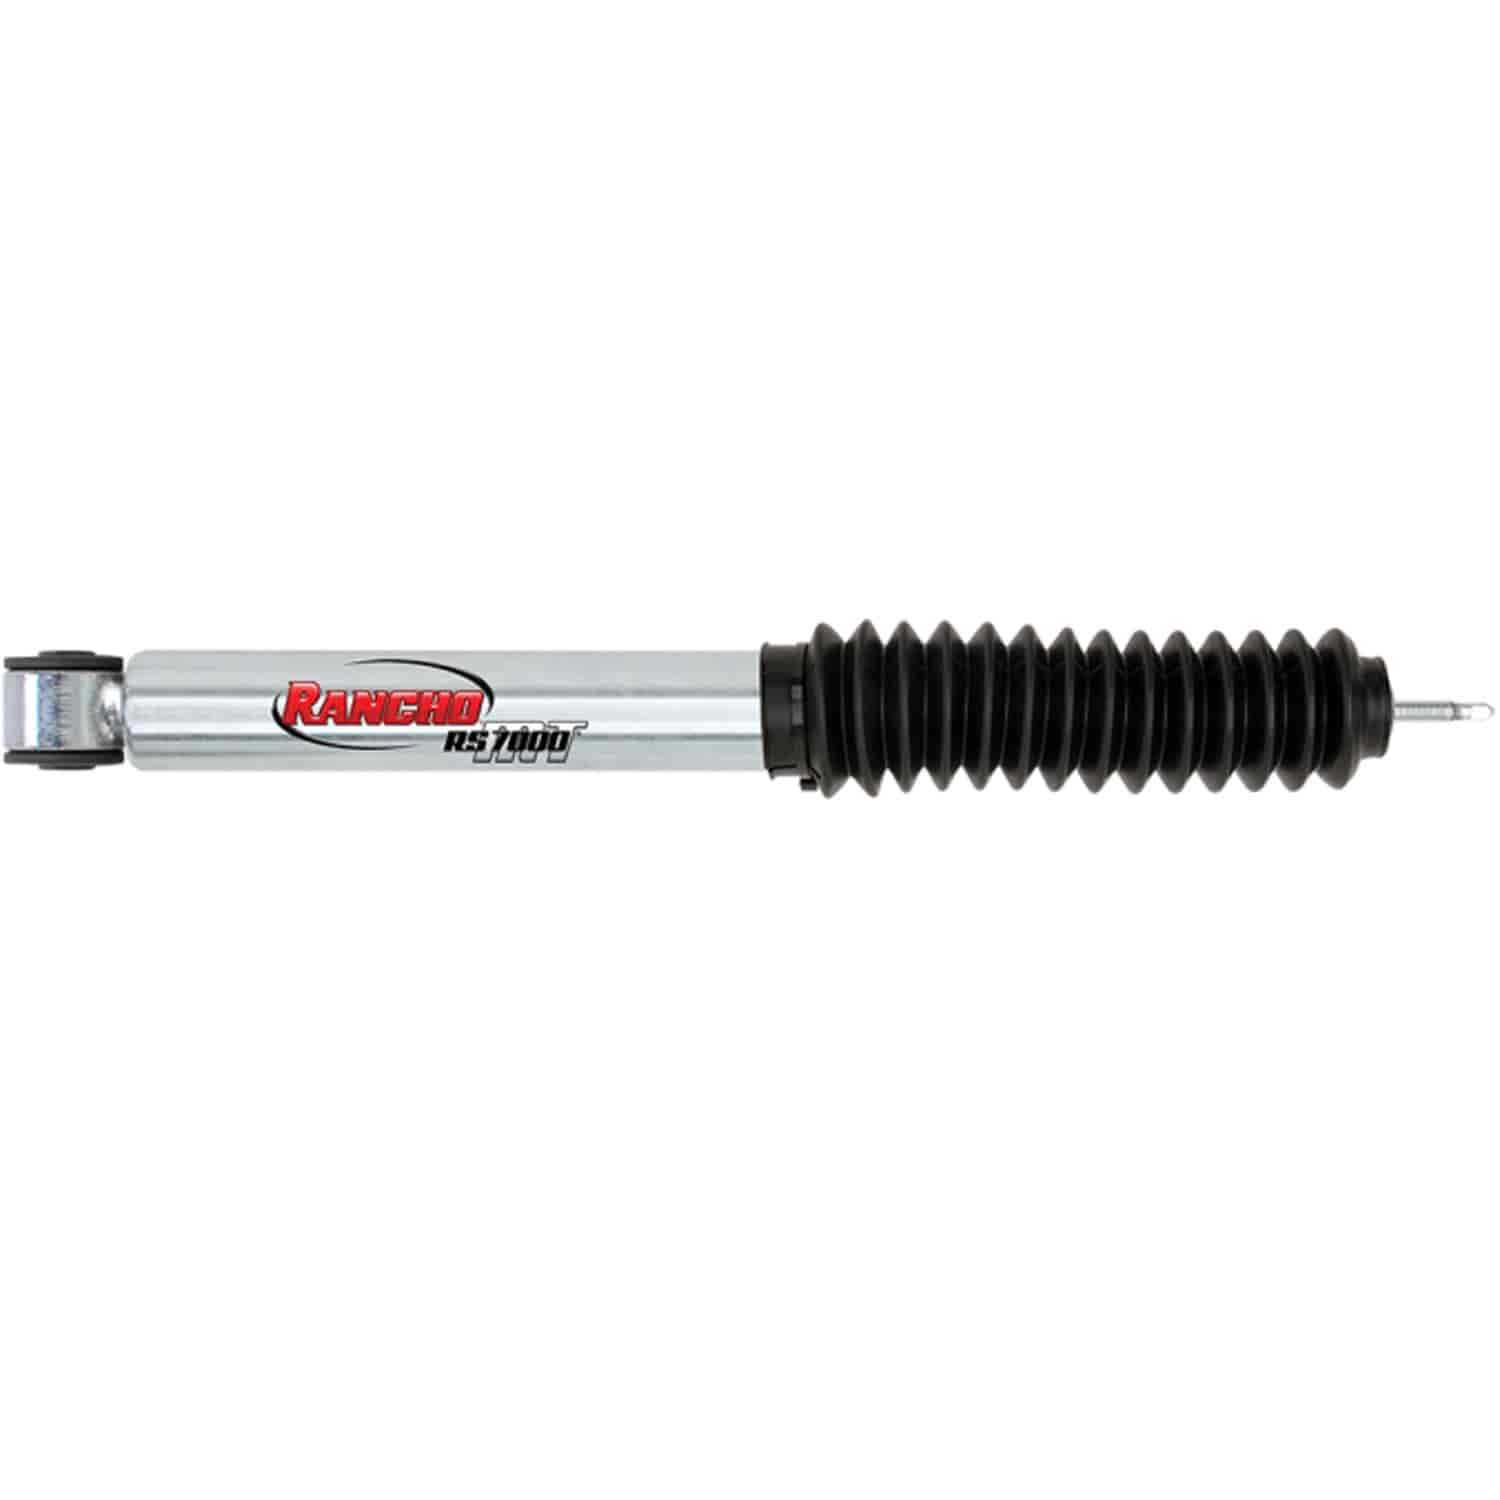 RS7000MT Front Shock Fits Chevy Avalanche 2500 and